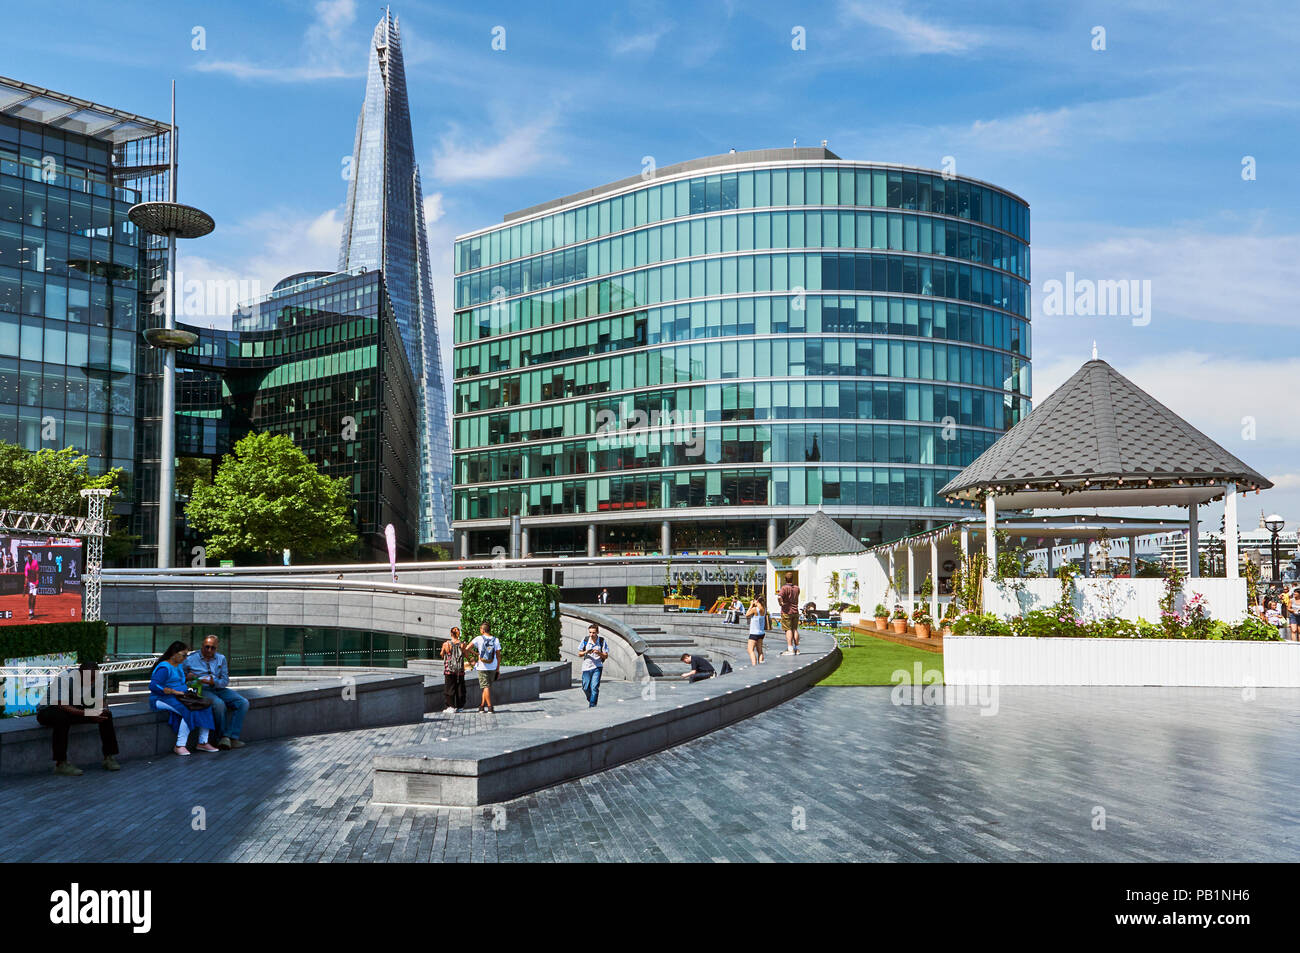 More London Place on the South Bank, London UK, in summertime, with The Scoop ampitheatre and the Shard in the background Stock Photo